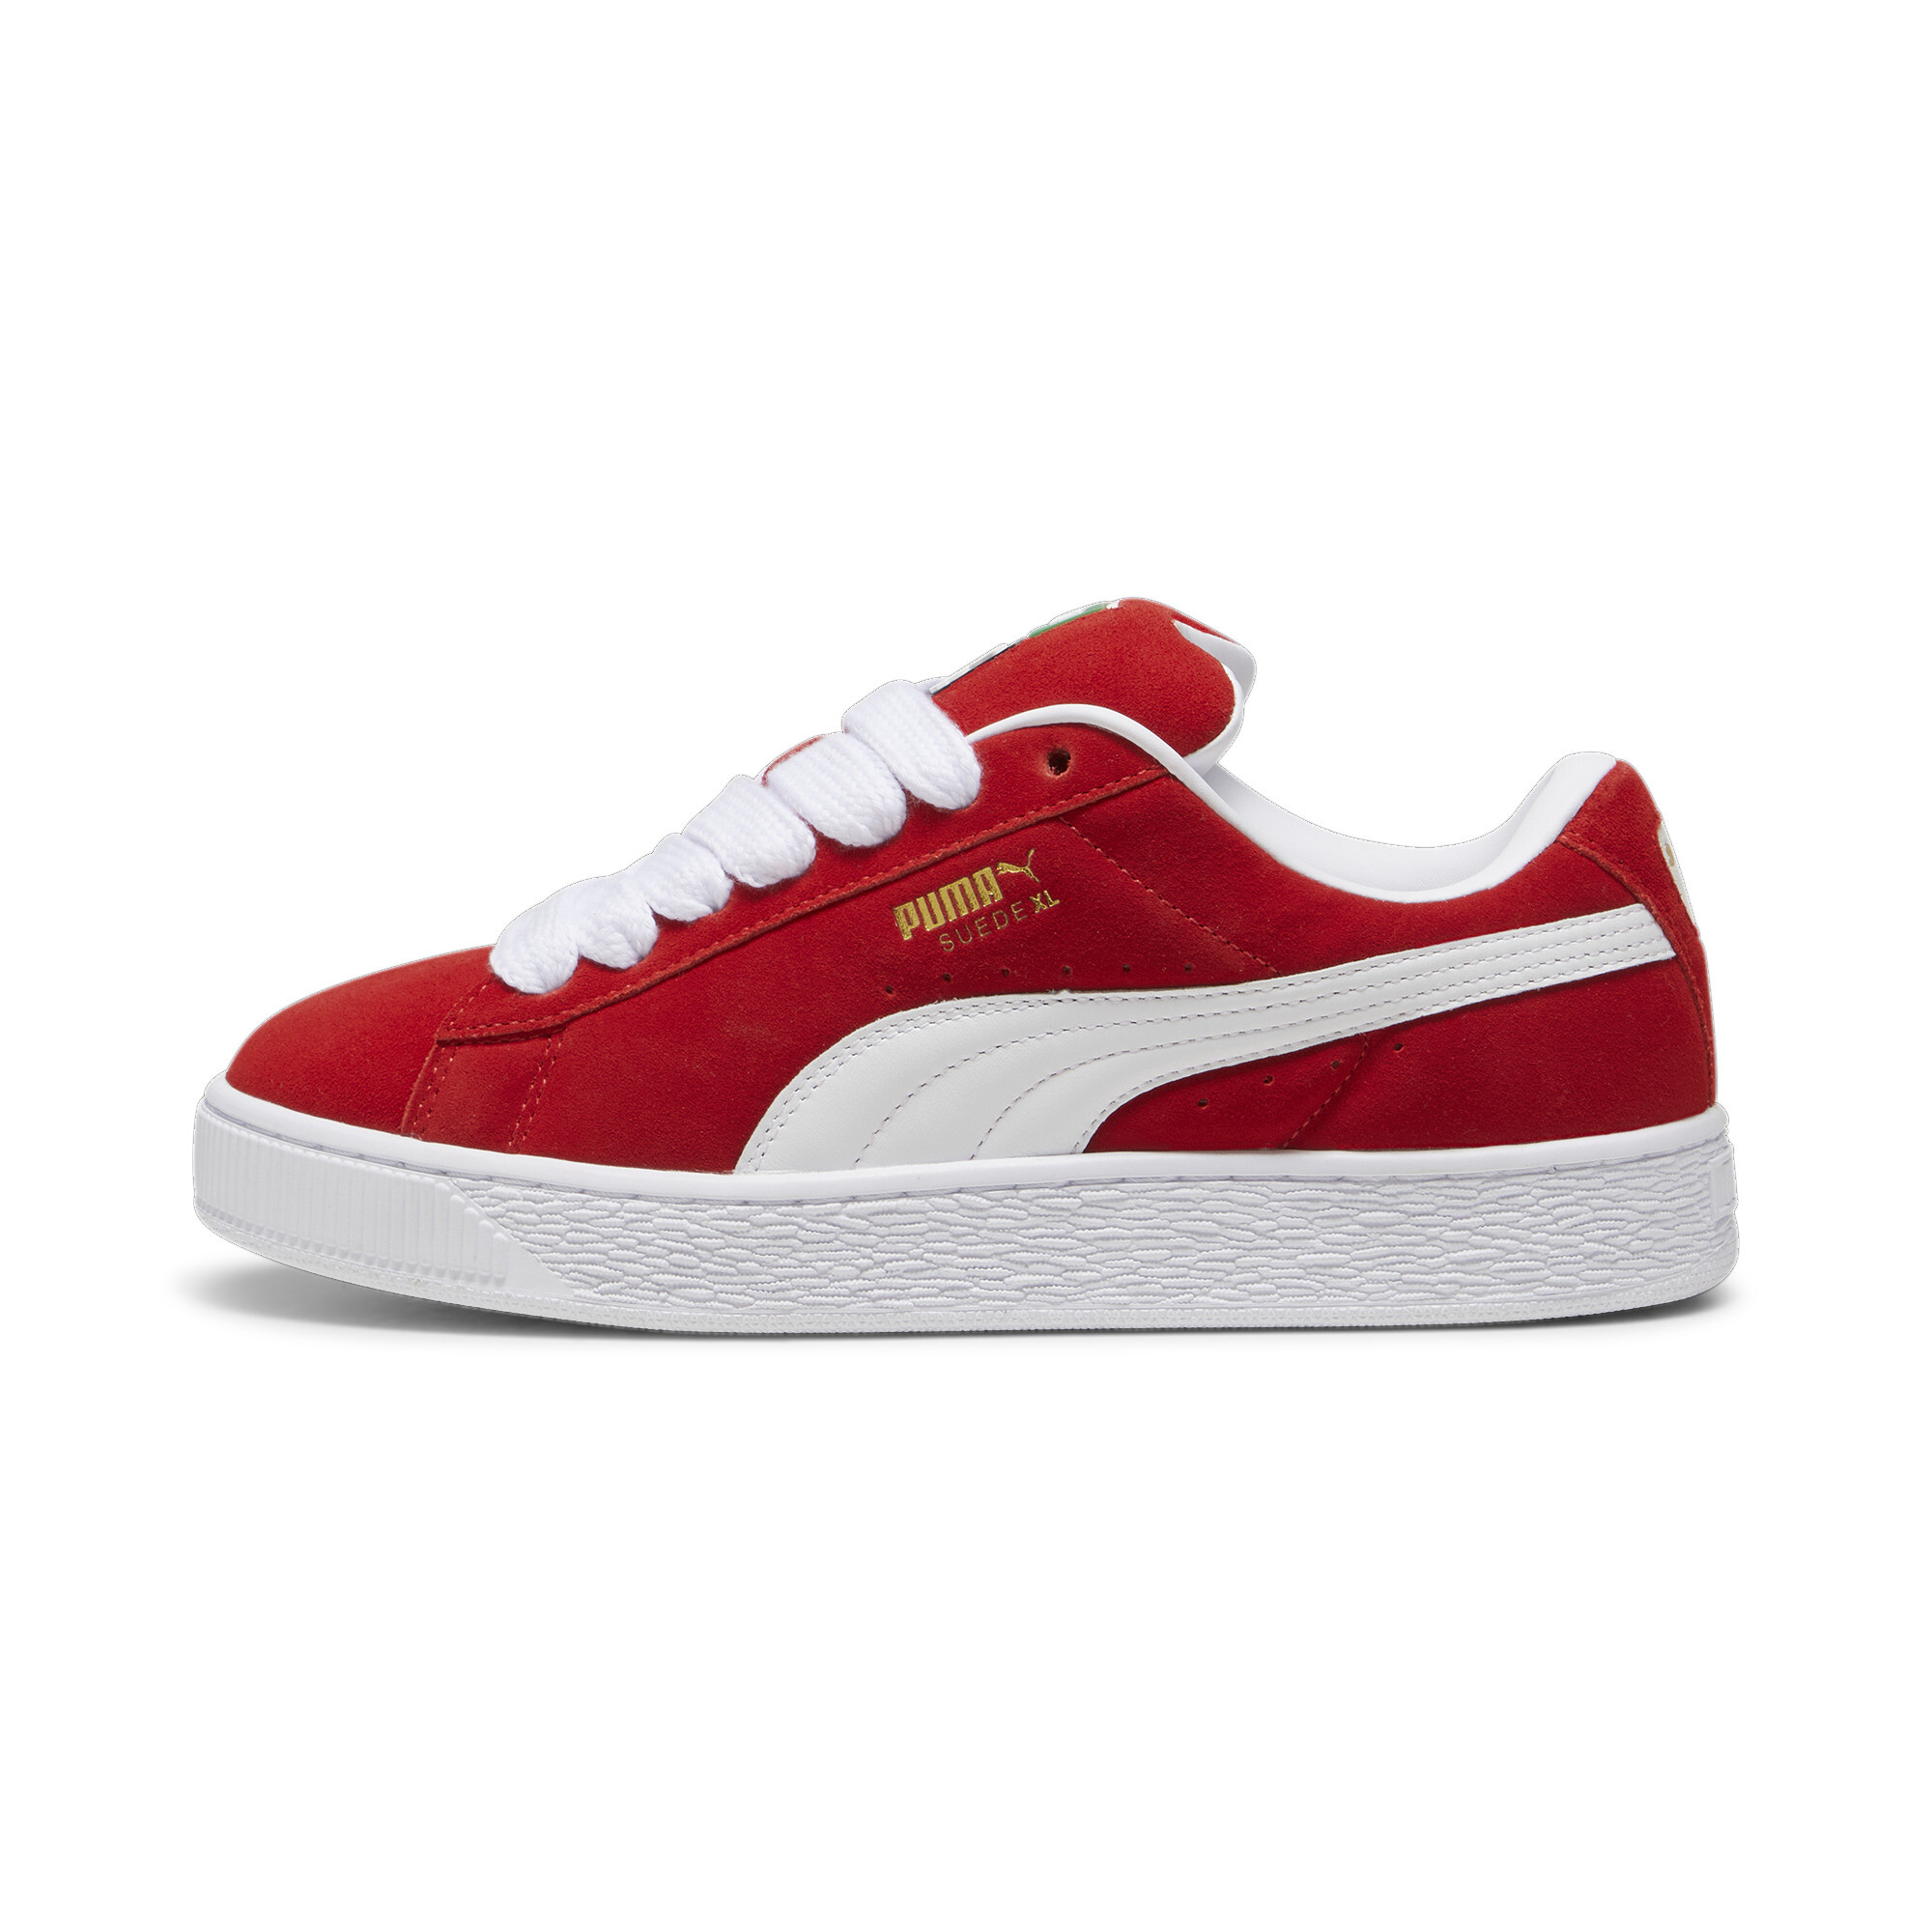 Puma Suede XL Sneakers Unisex, Red, Size 37.5, Shoes